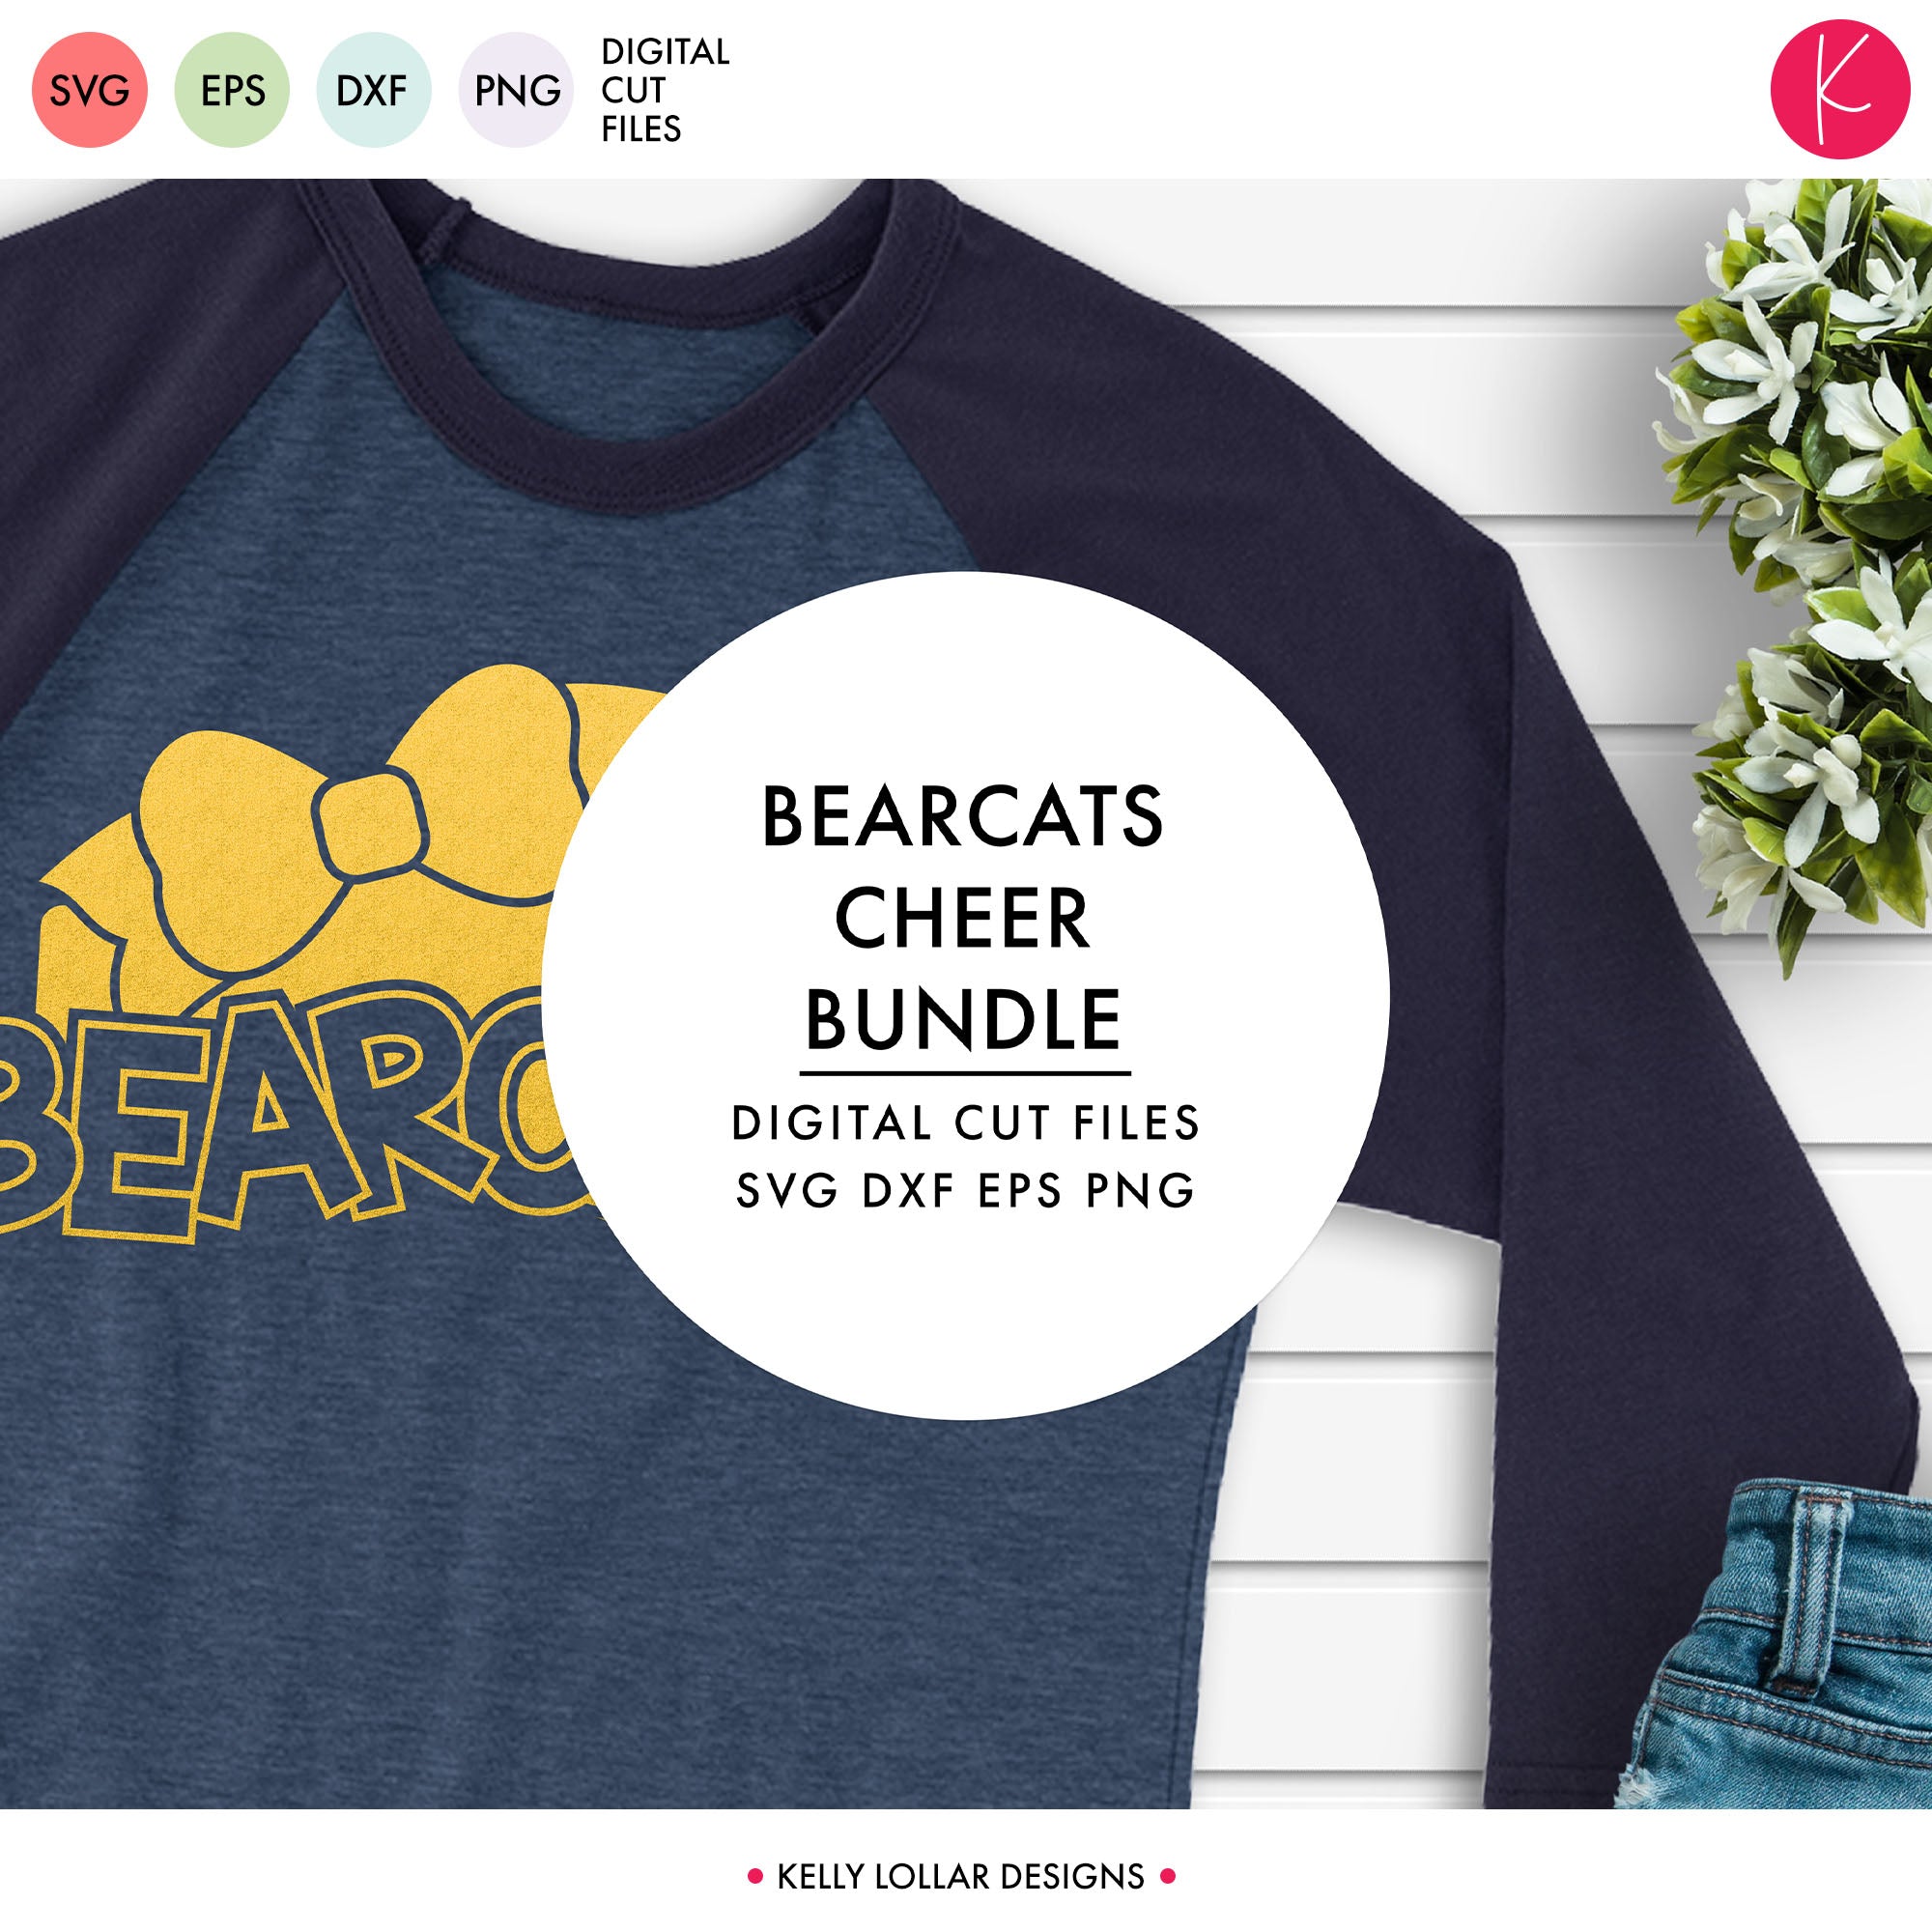 Download Bearcats Cheer Bundle | SVG DXF EPS PNG Cut Files - Kelly ...